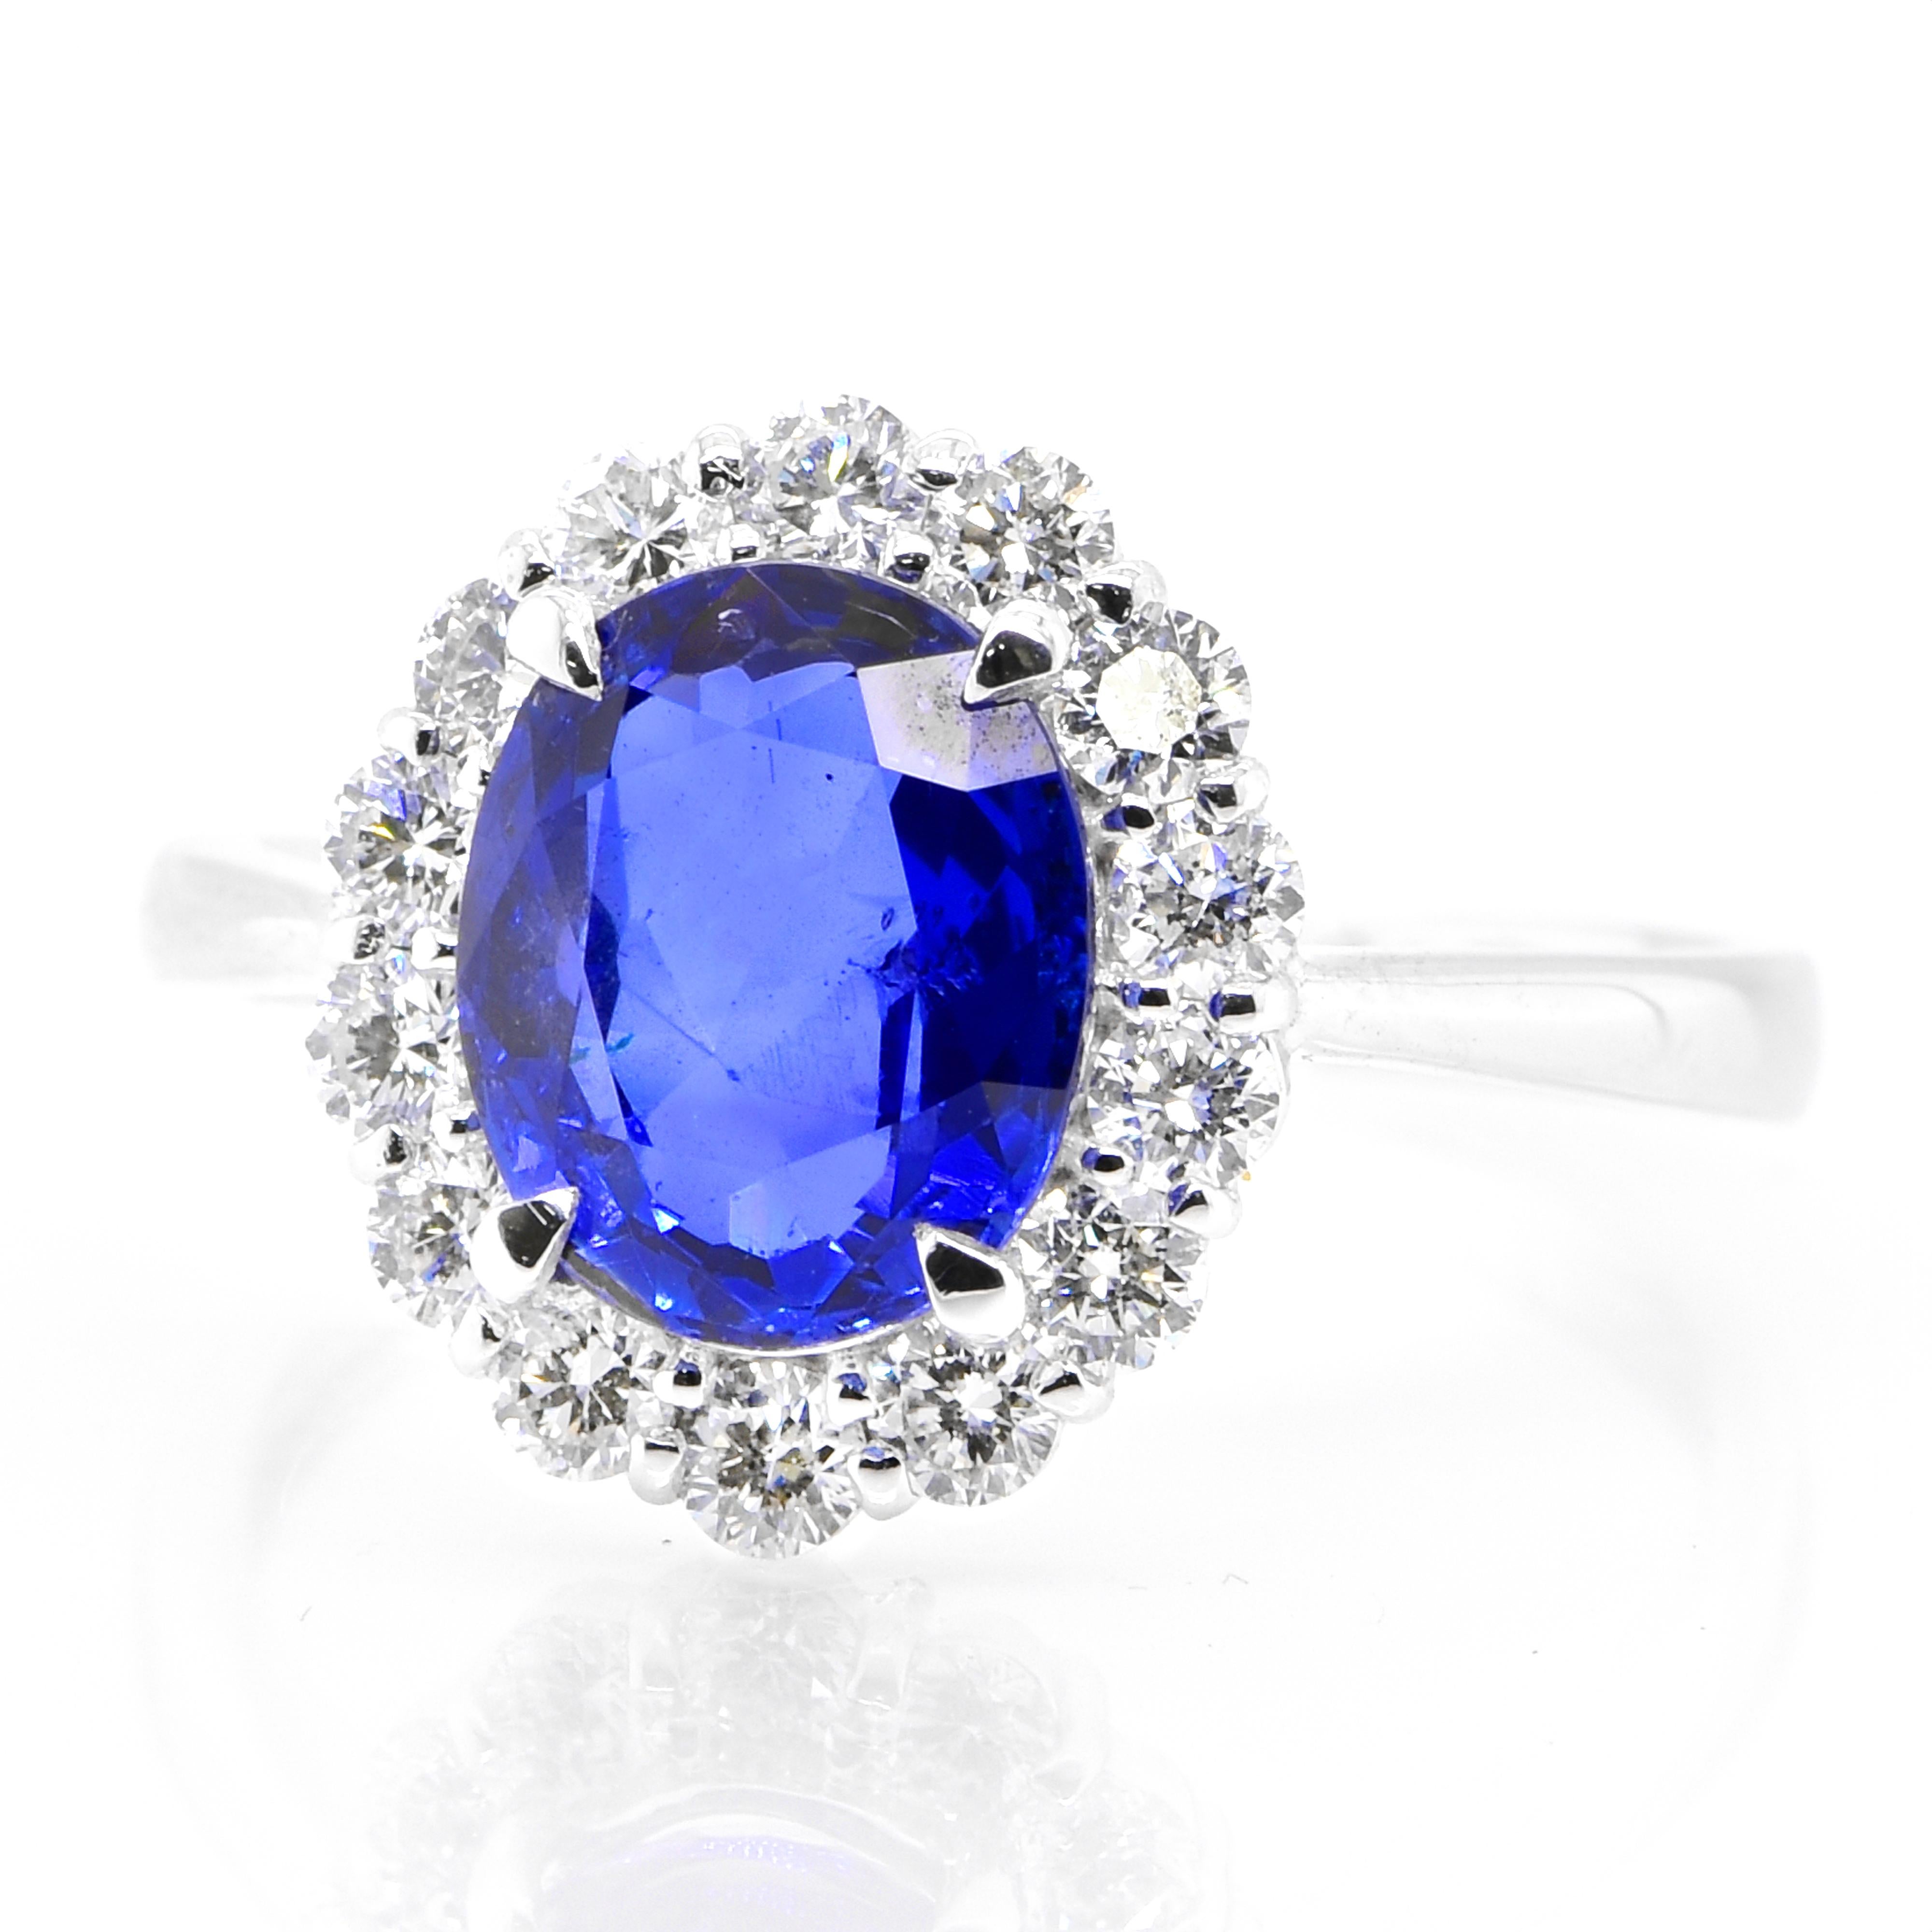 A beautiful ring featuring 2.393 Carat Natural Sapphire and 0.56 Carats Diamond Accents set in Platinum. Sapphires have extraordinary durability - they excel in hardness as well as toughness and durability making them very popular in jewelry.